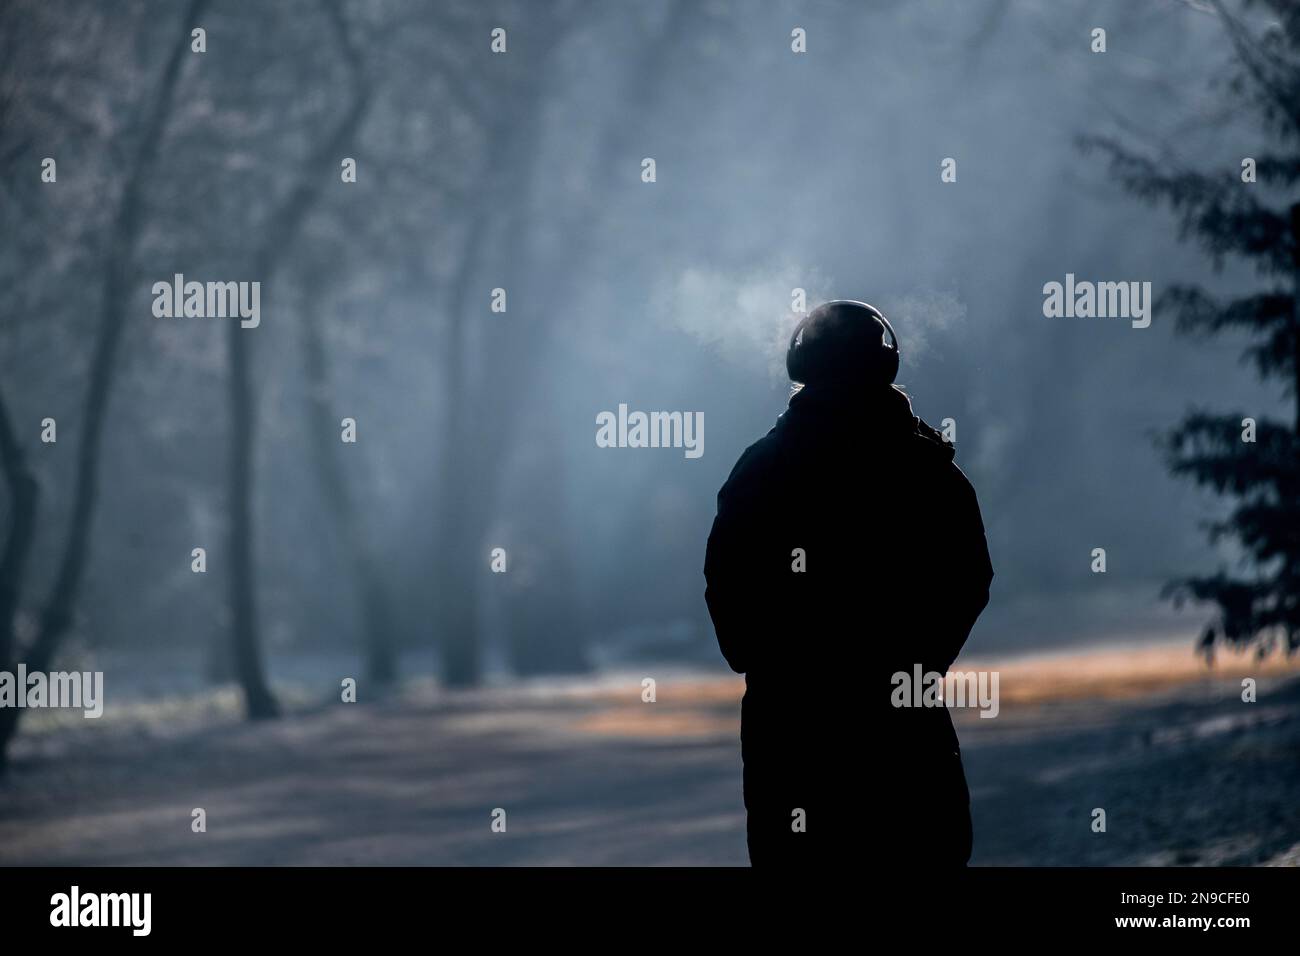 Walking alone in winter listening to music Stock Photo